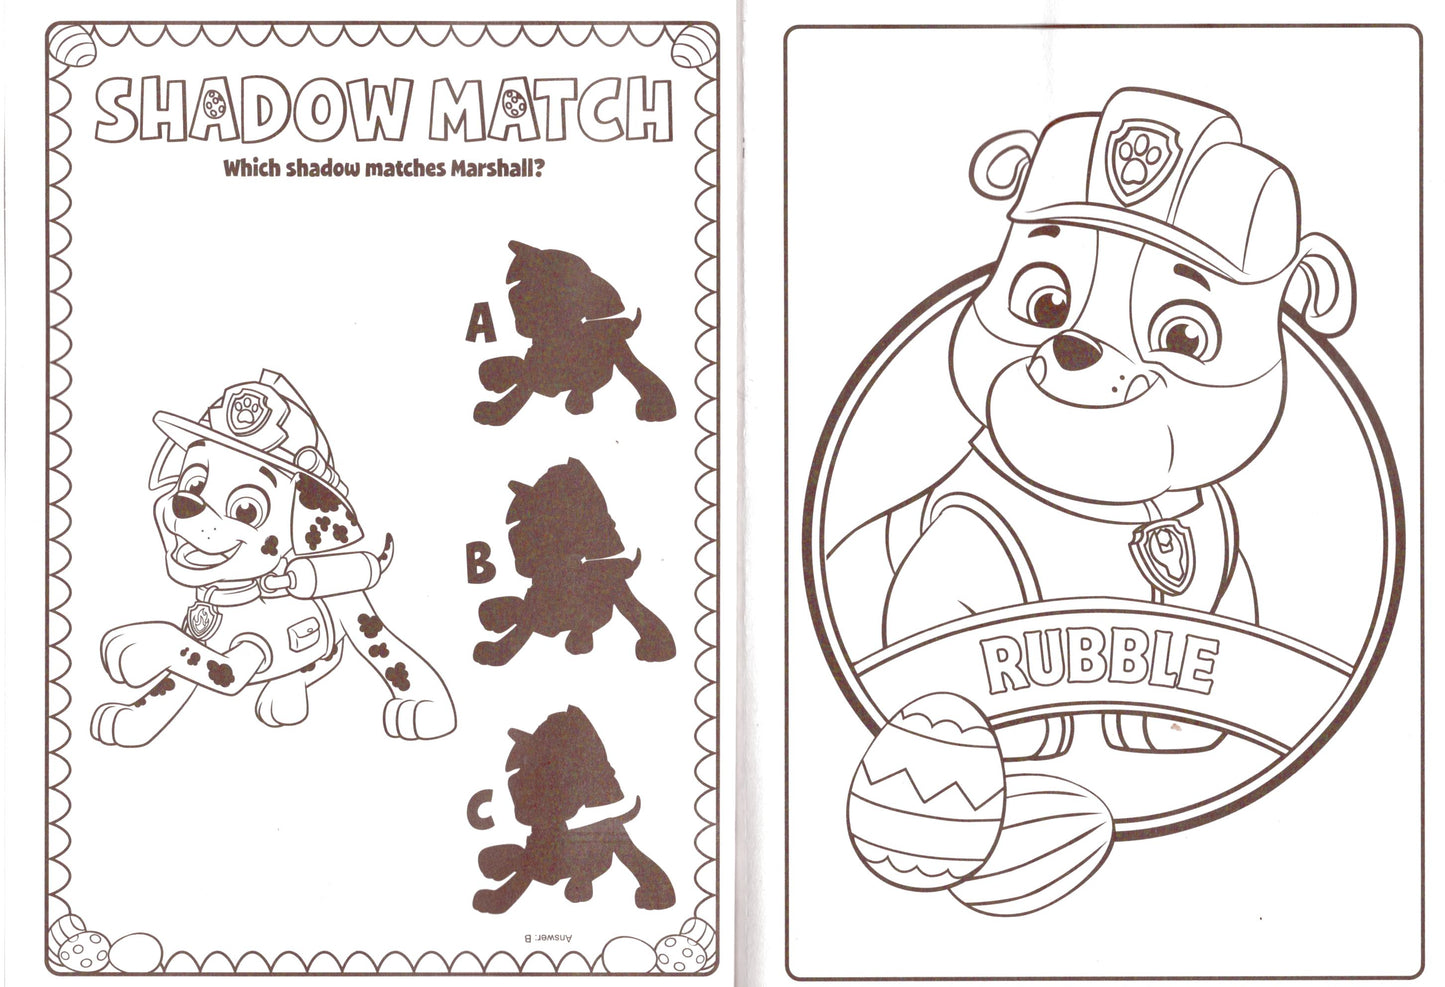 Paw Patrol - Easter Pups on a Roll - Jumbo Coloring & Activity Book